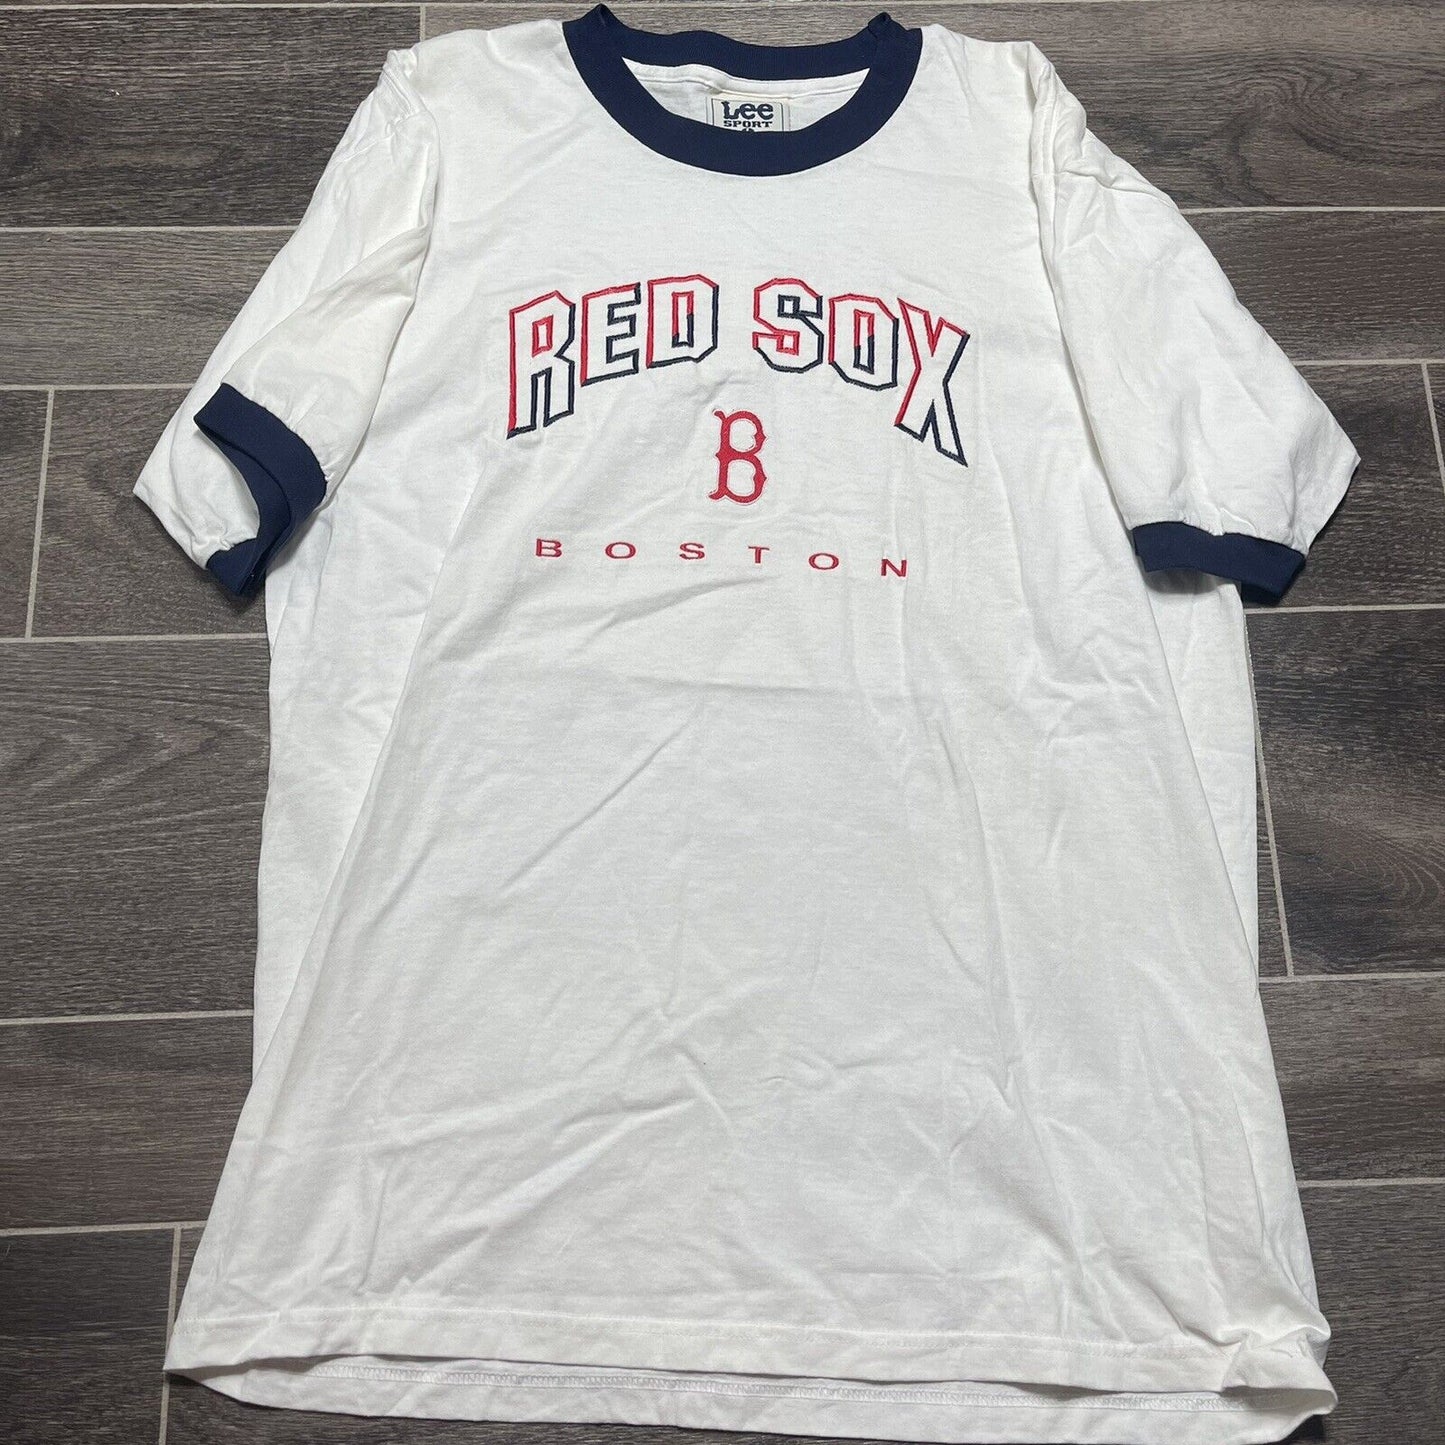 vintage boston red sox lee sports t shirt size large